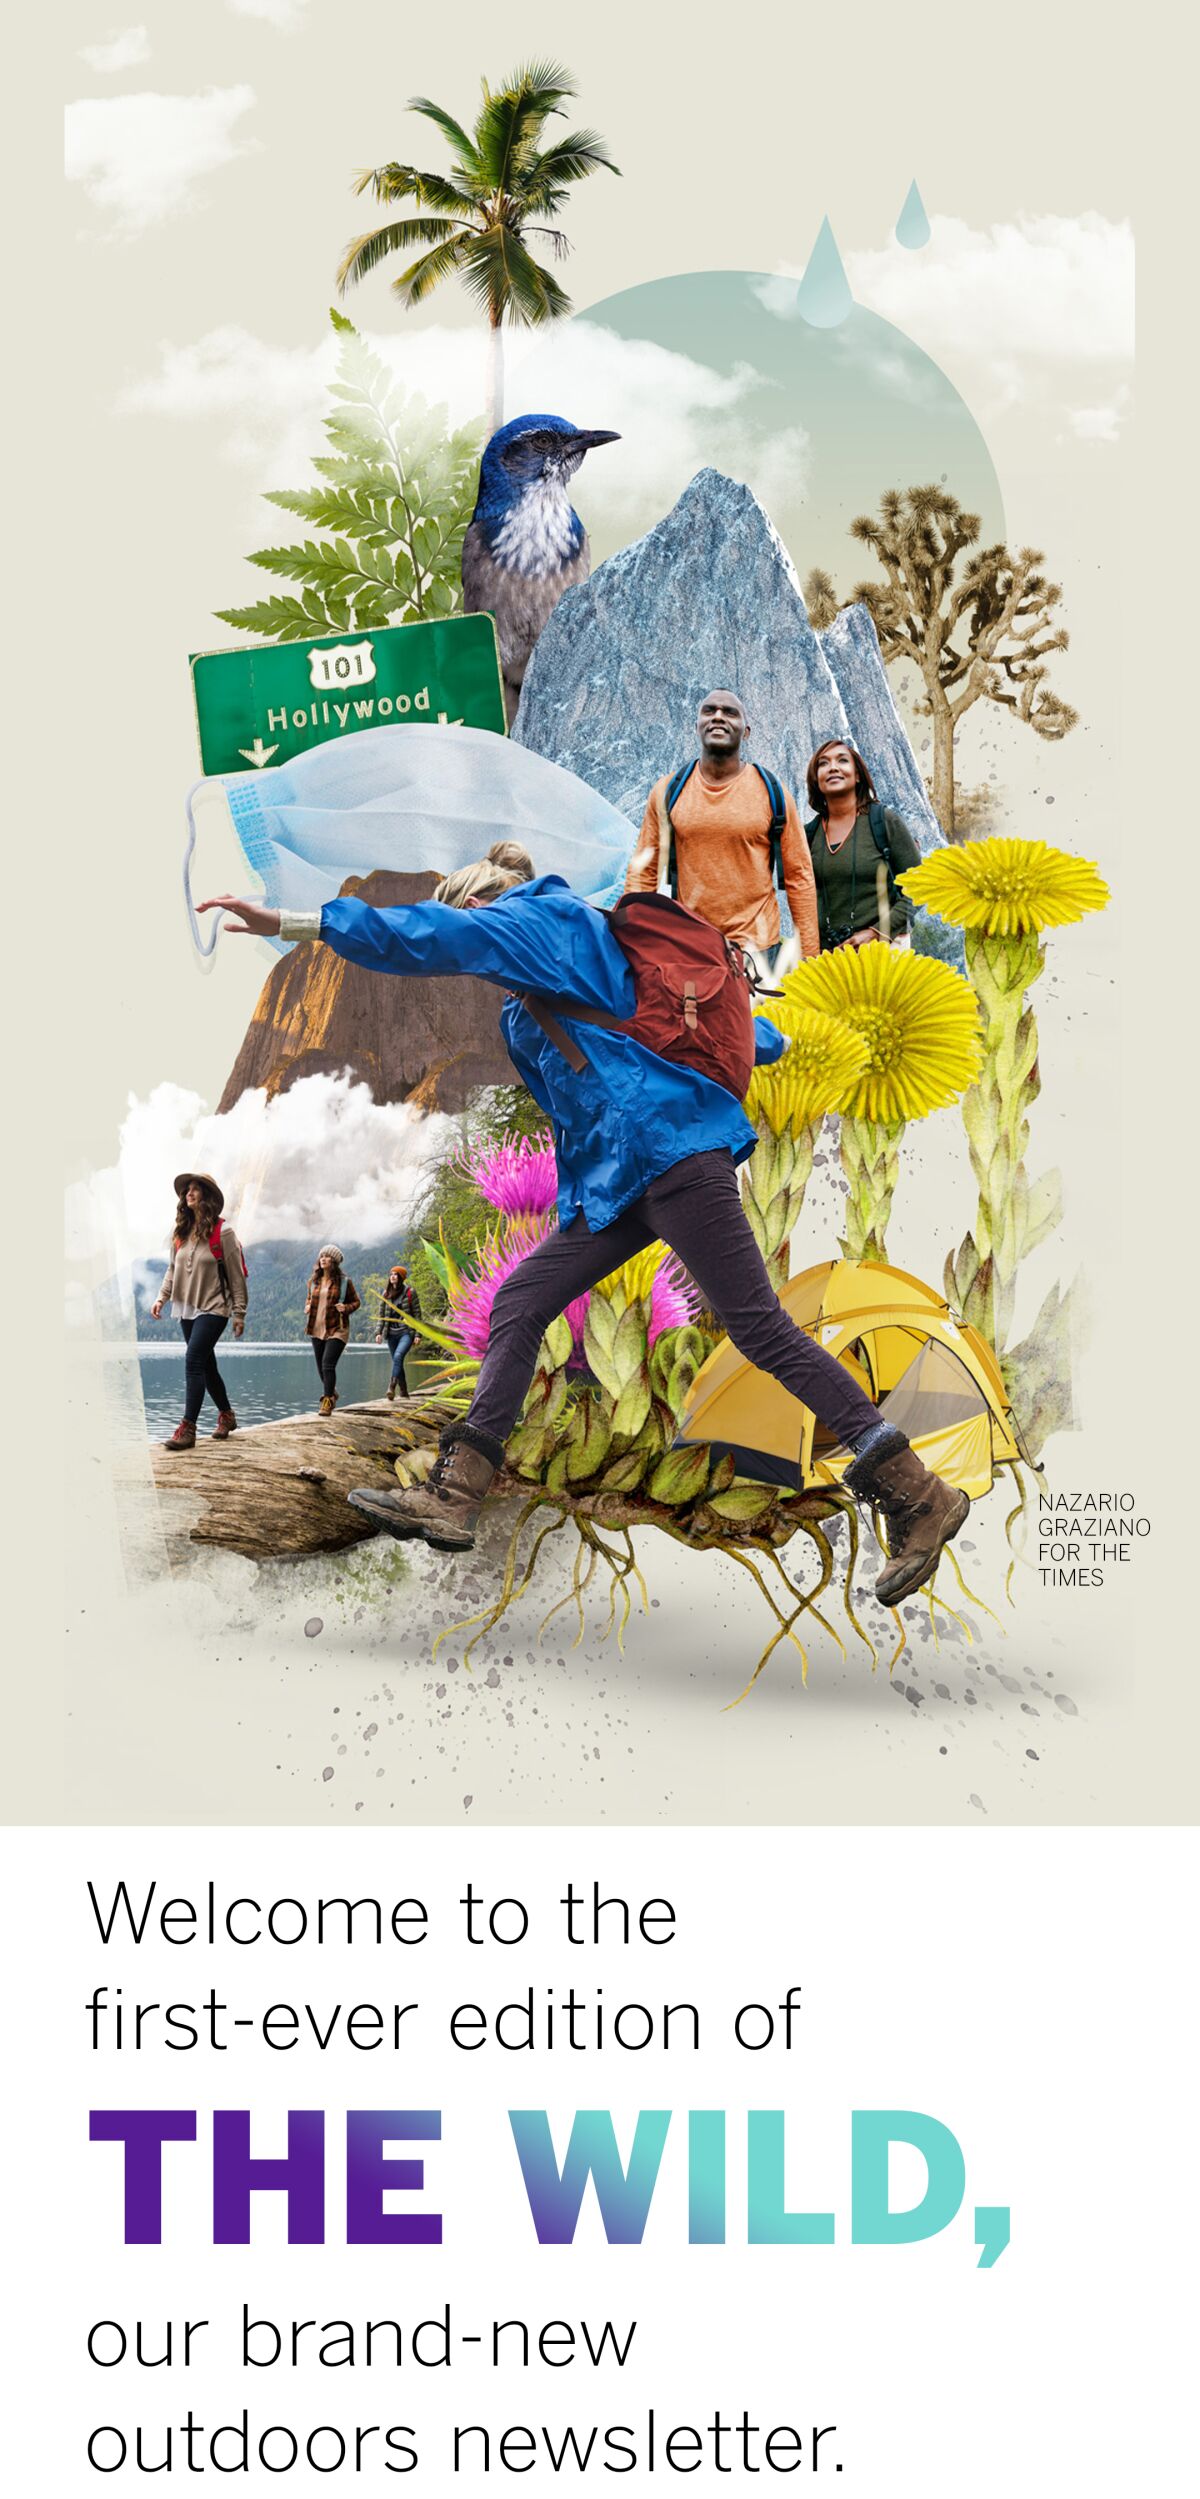 Welcome to the first-ever edition of The Wild, our brand-new outdoors newsletter.